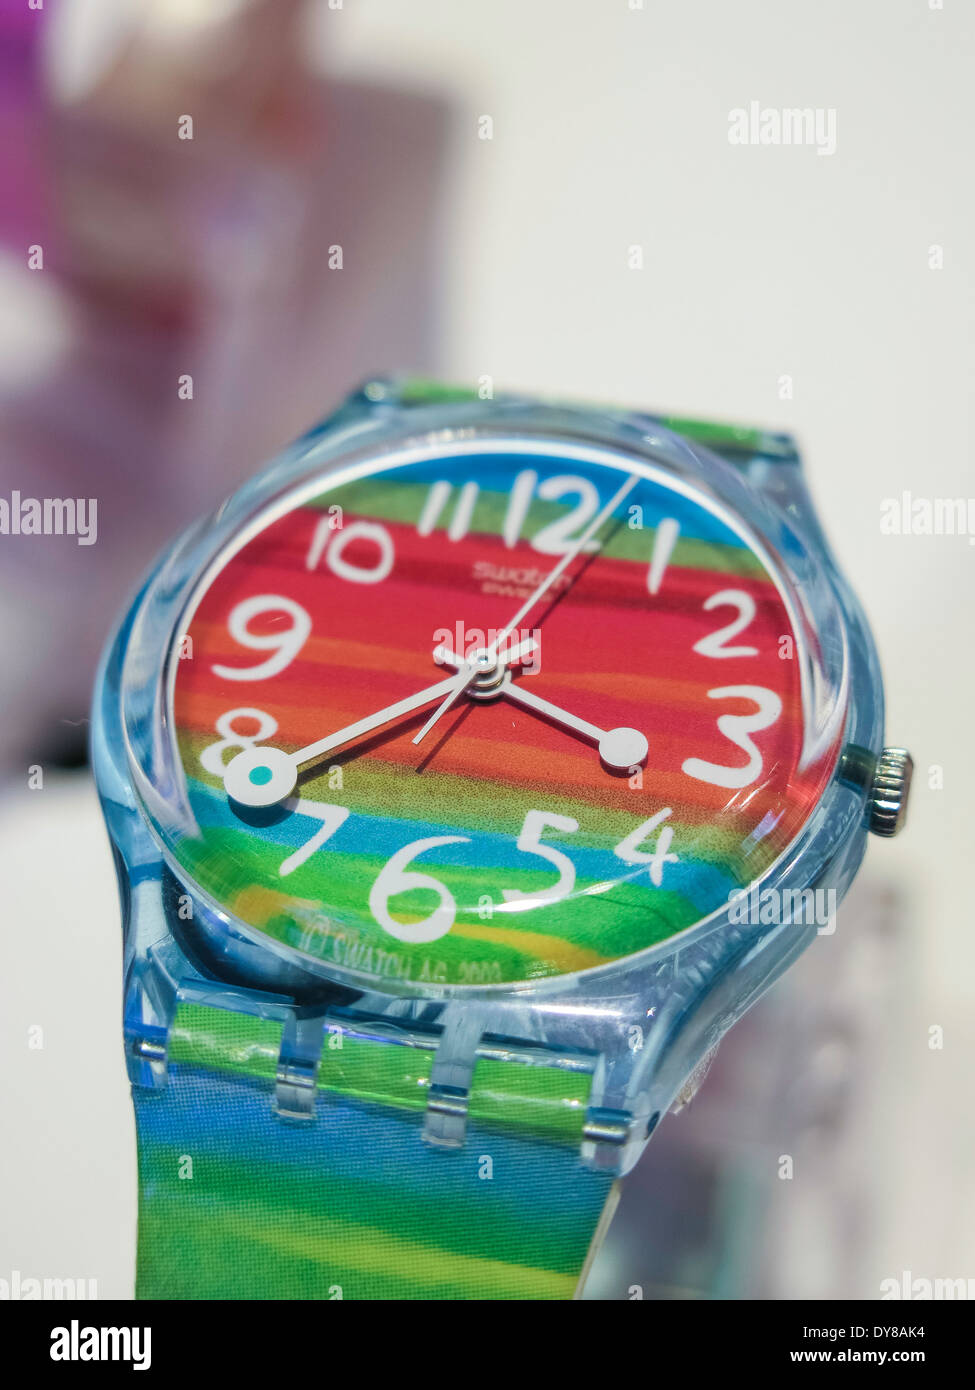 Colorful Analog Swatch Watch Face Stock Photo